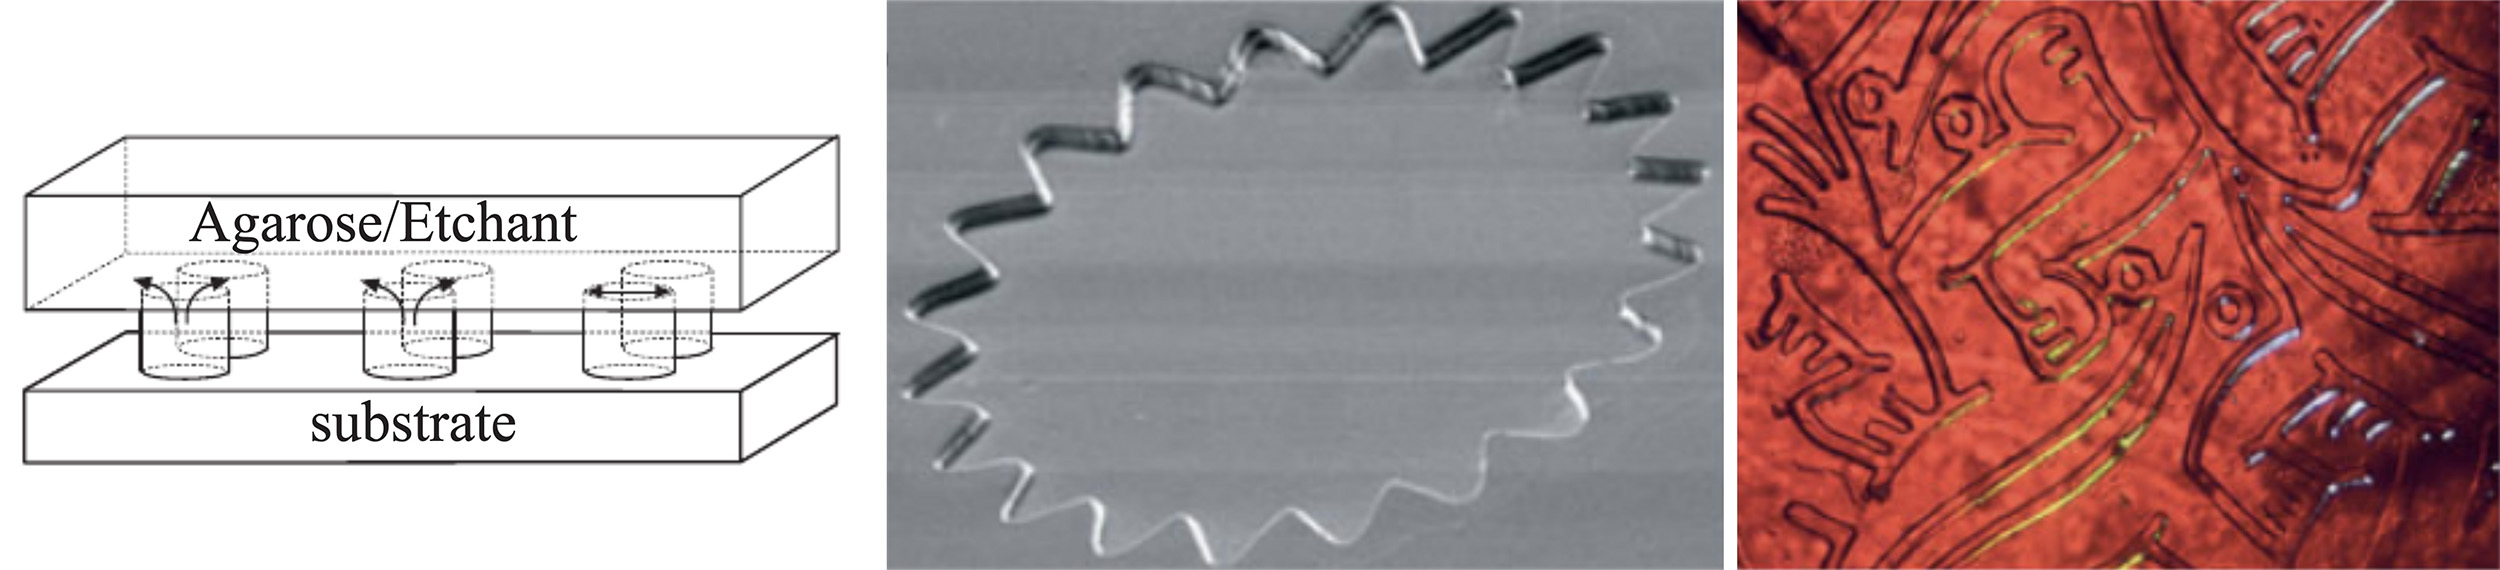 Picture of publication: Cutting into solids with micropatterned gels